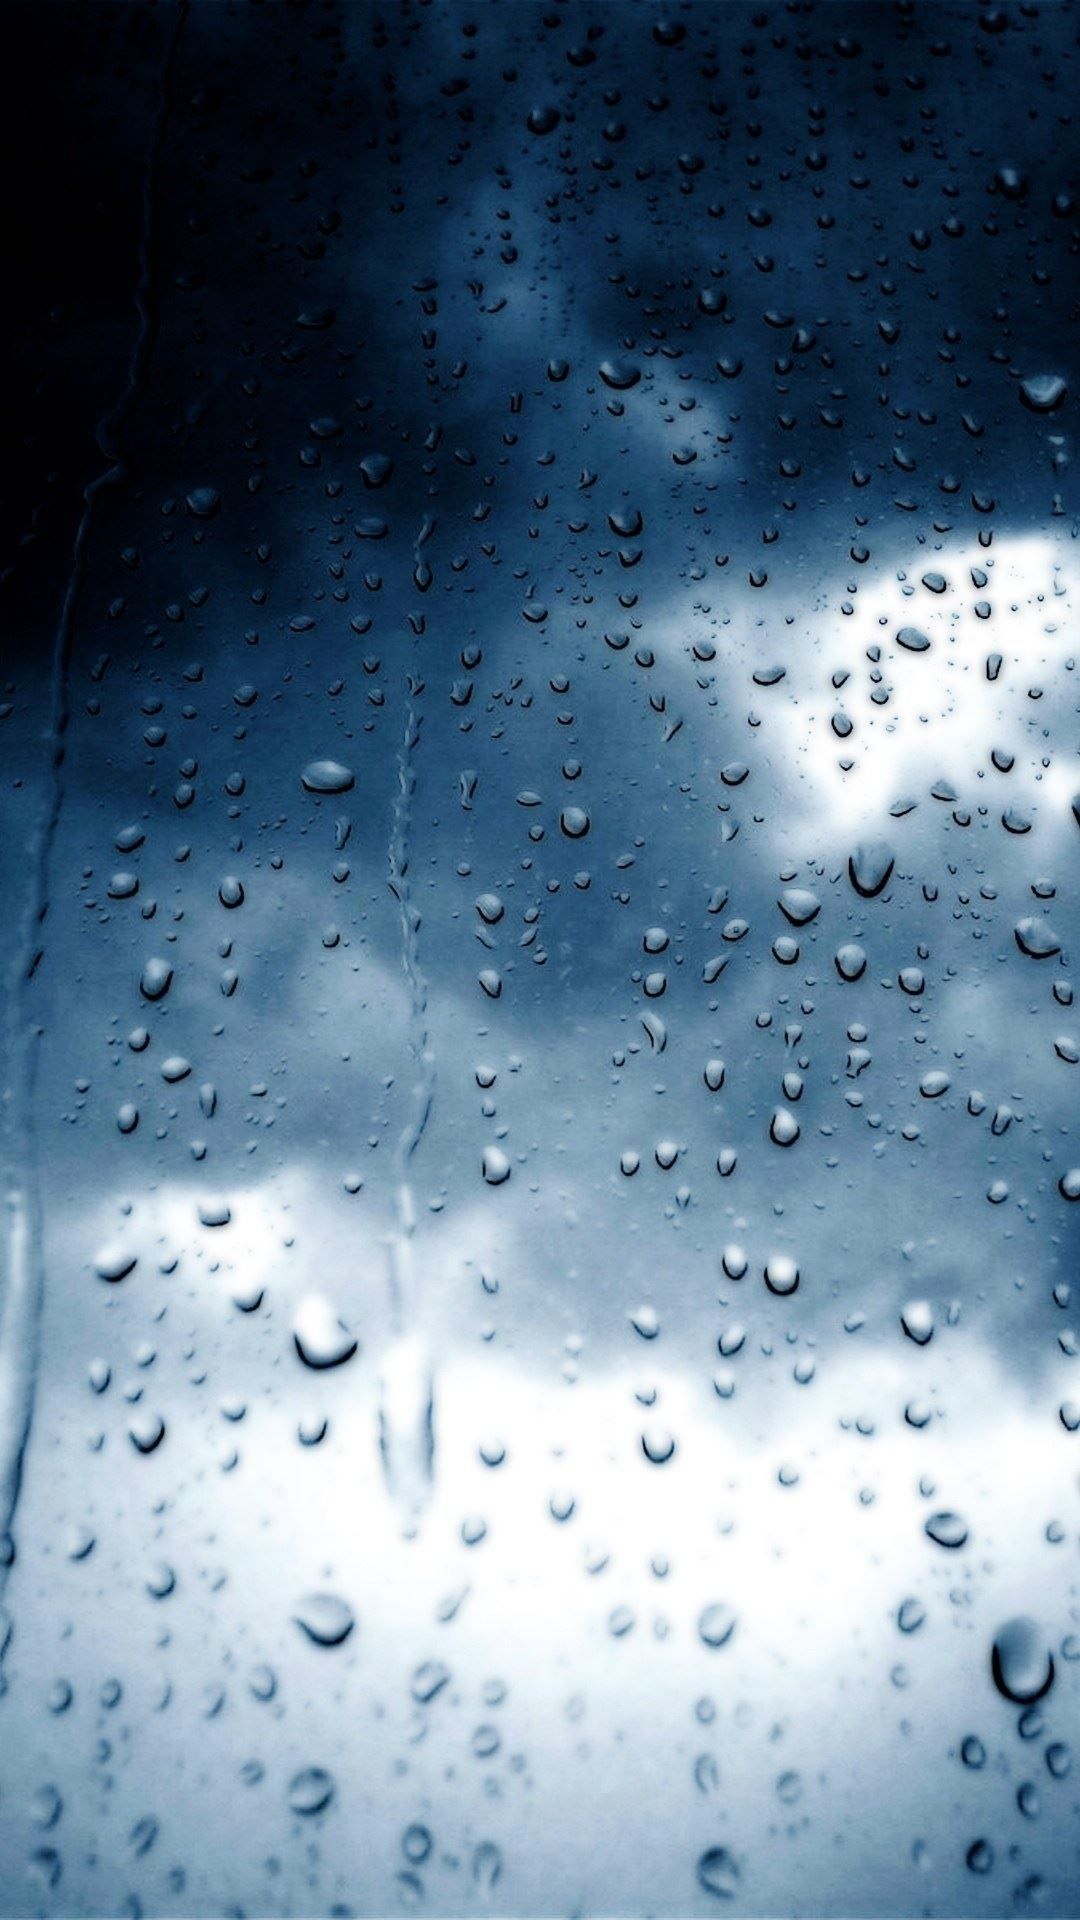 Rainy Day Raindrops Window Dark Clouds Android Wallpaper free download